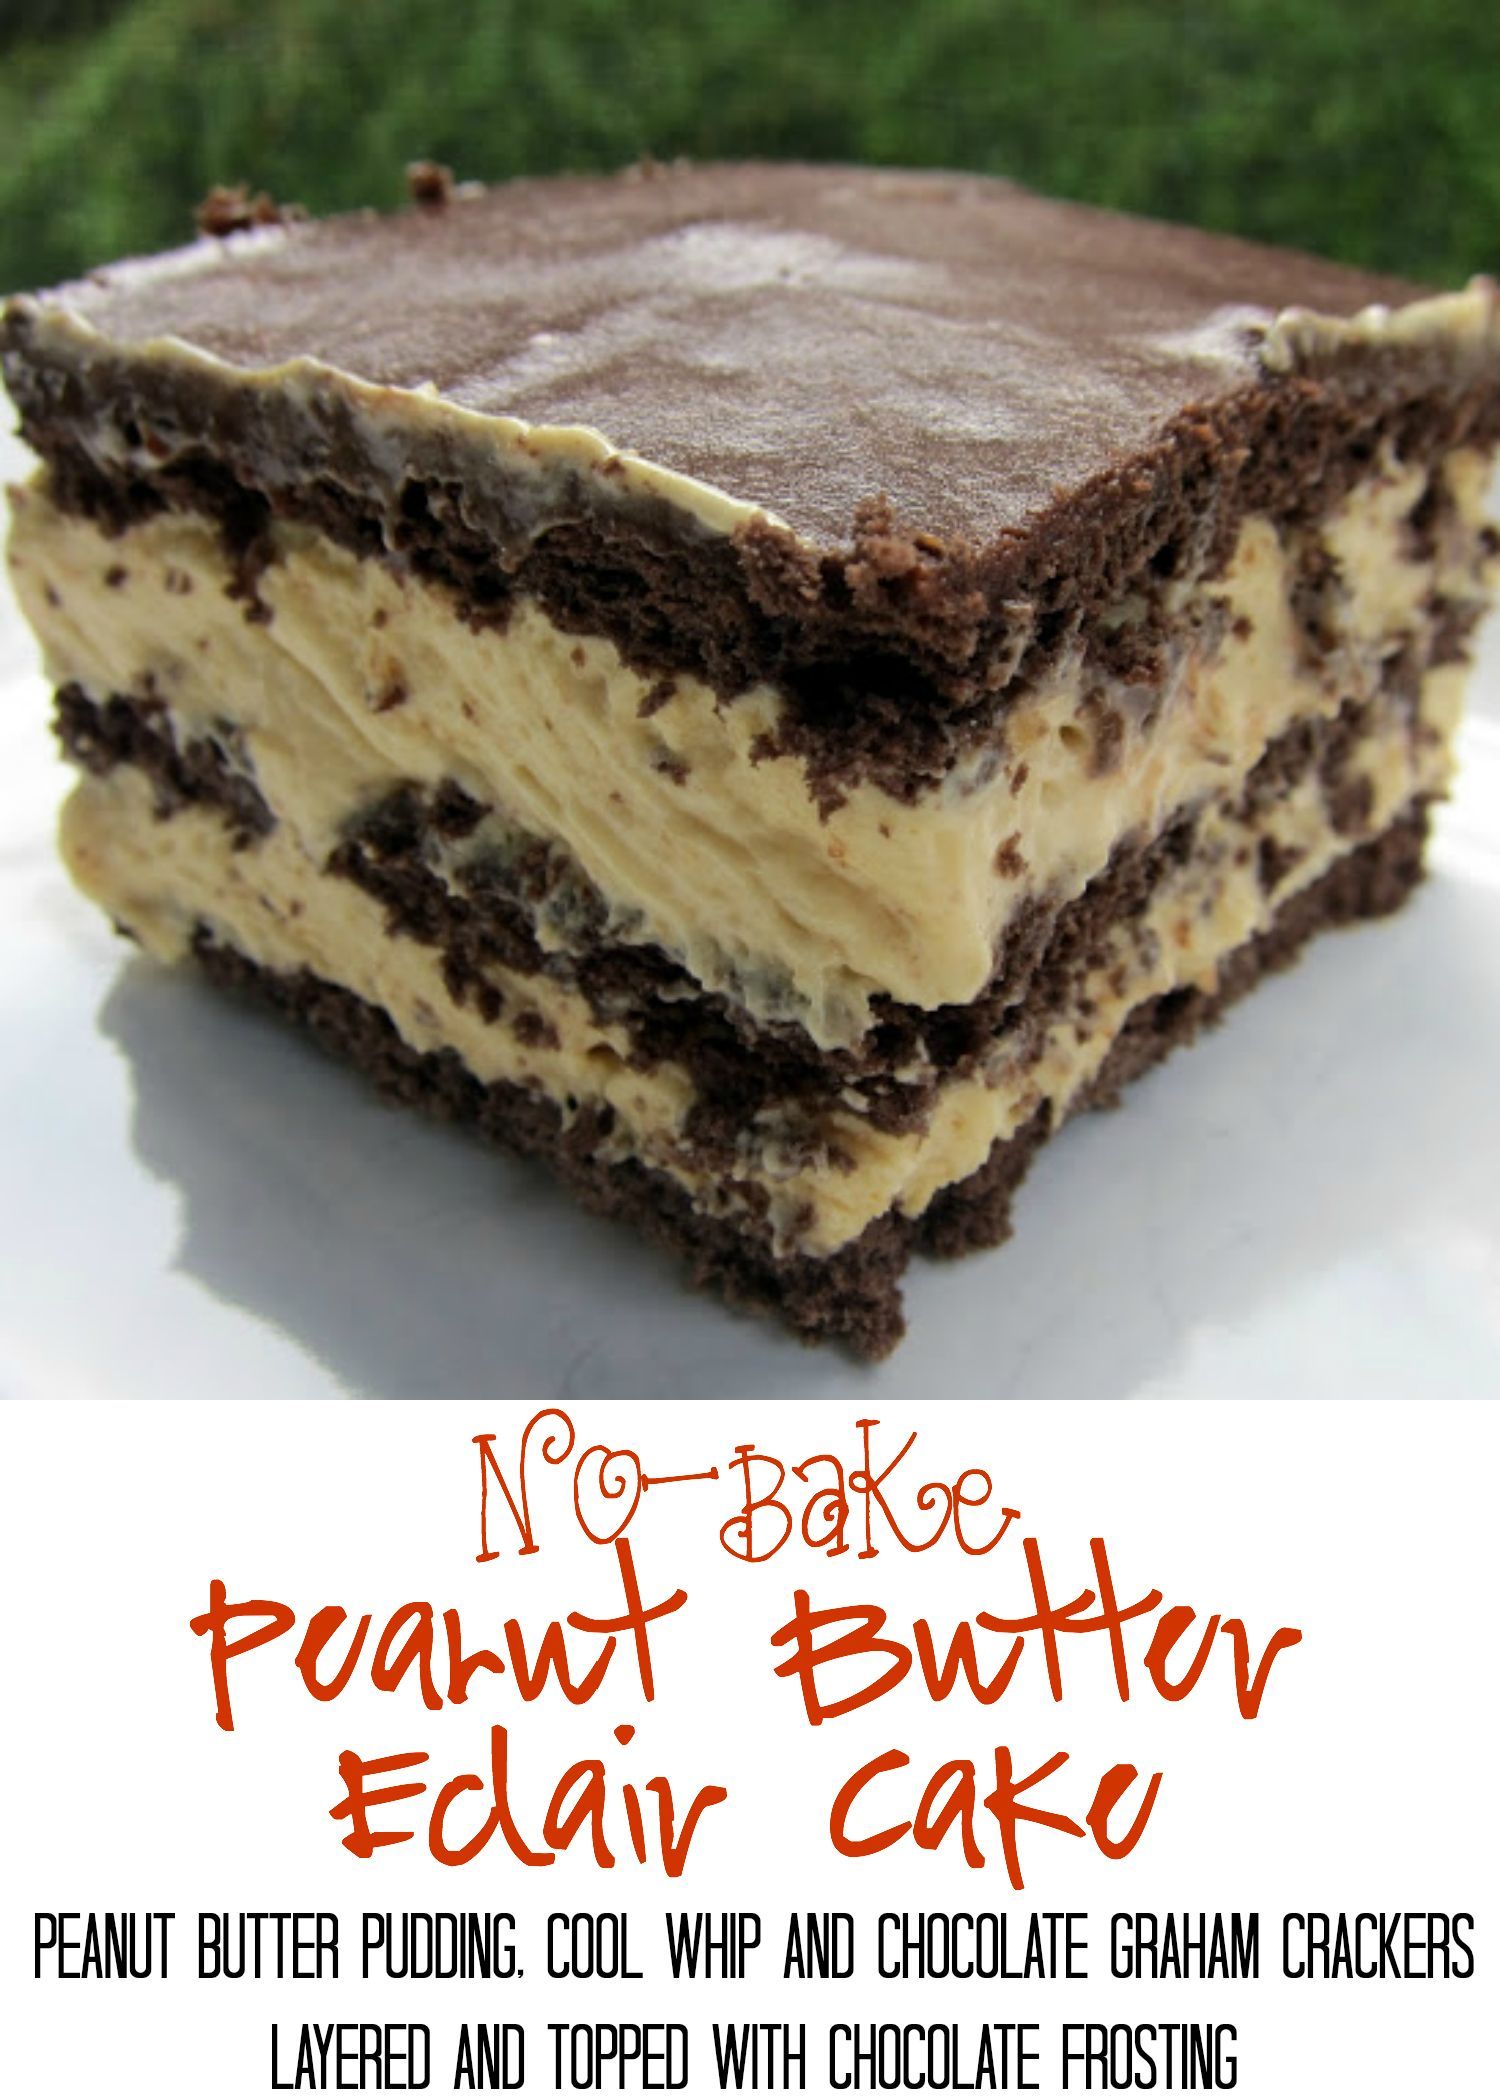 No-Bake Peanut Butter Eclair Cake Recipe – peanut butter pudding, cool whip and chocolate graham crackers layered and topped with